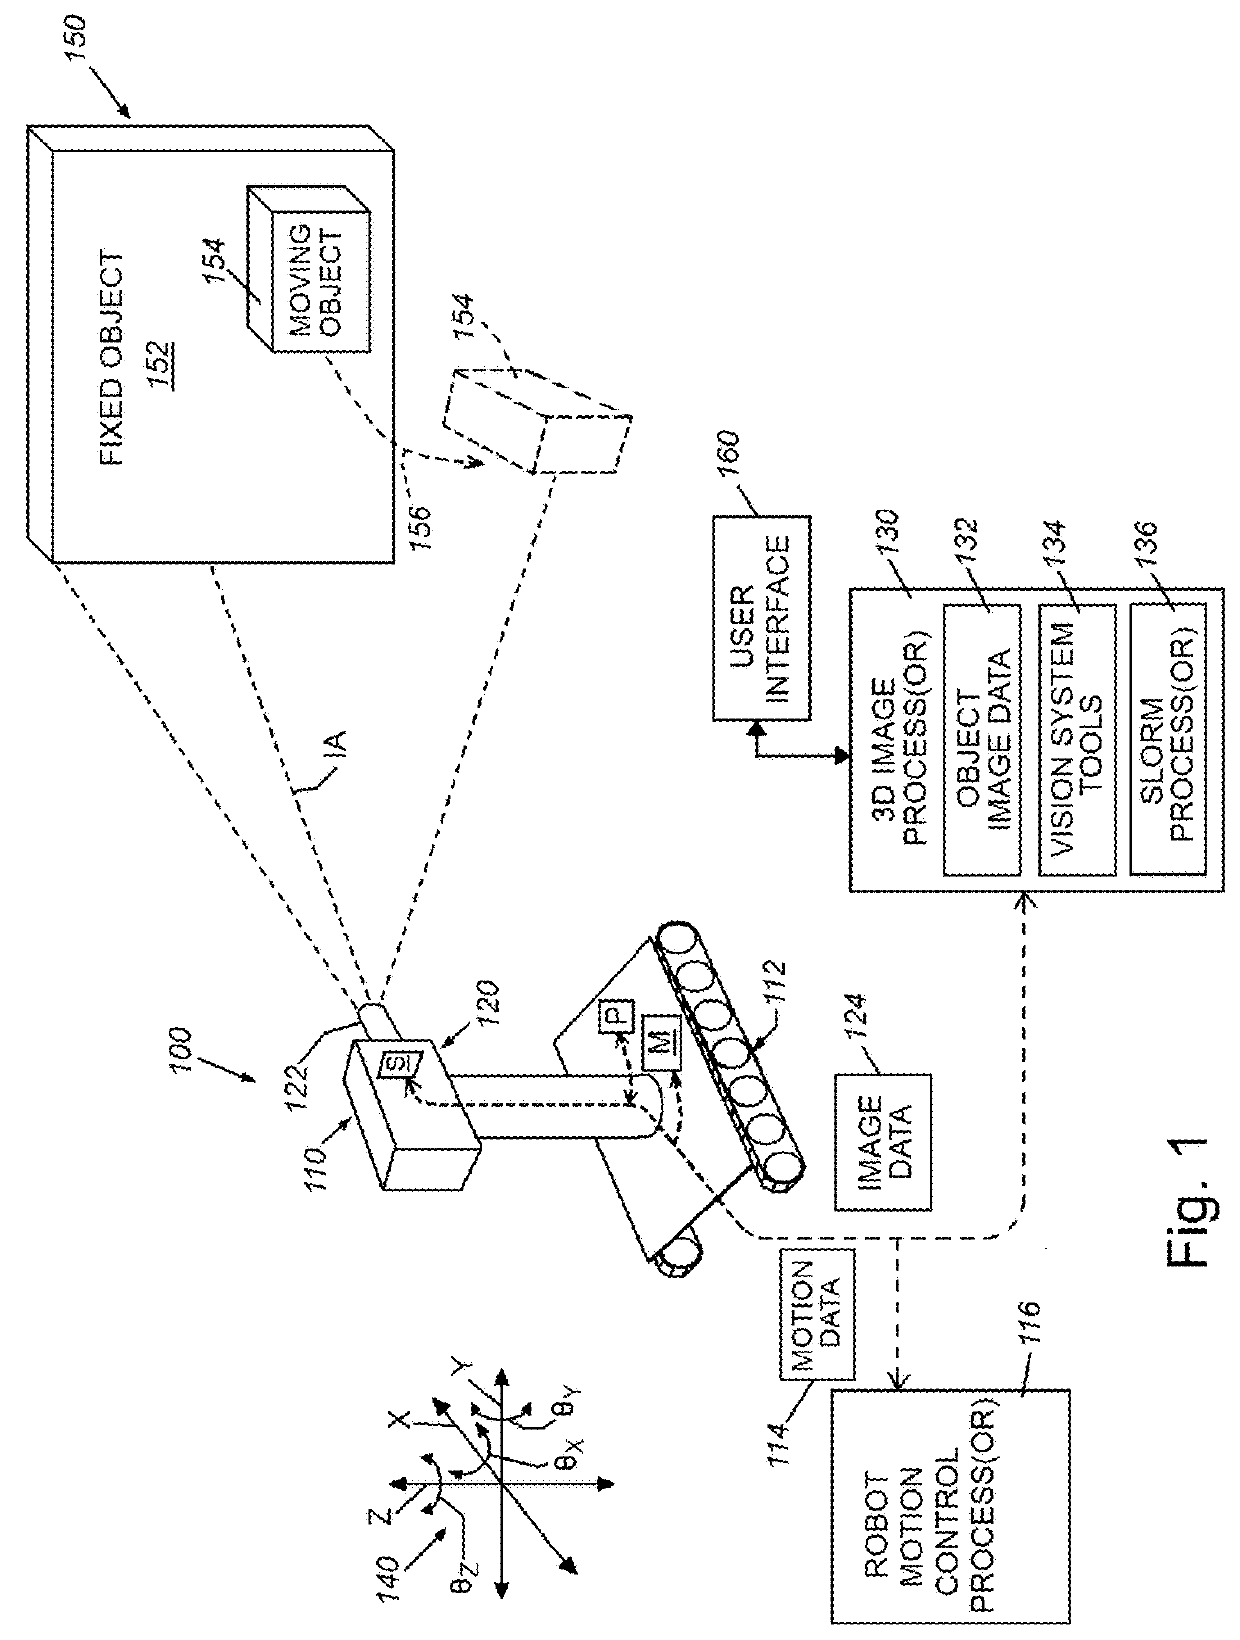 System and method for semantic simultaneous localization and mapping of static and dynamic objects